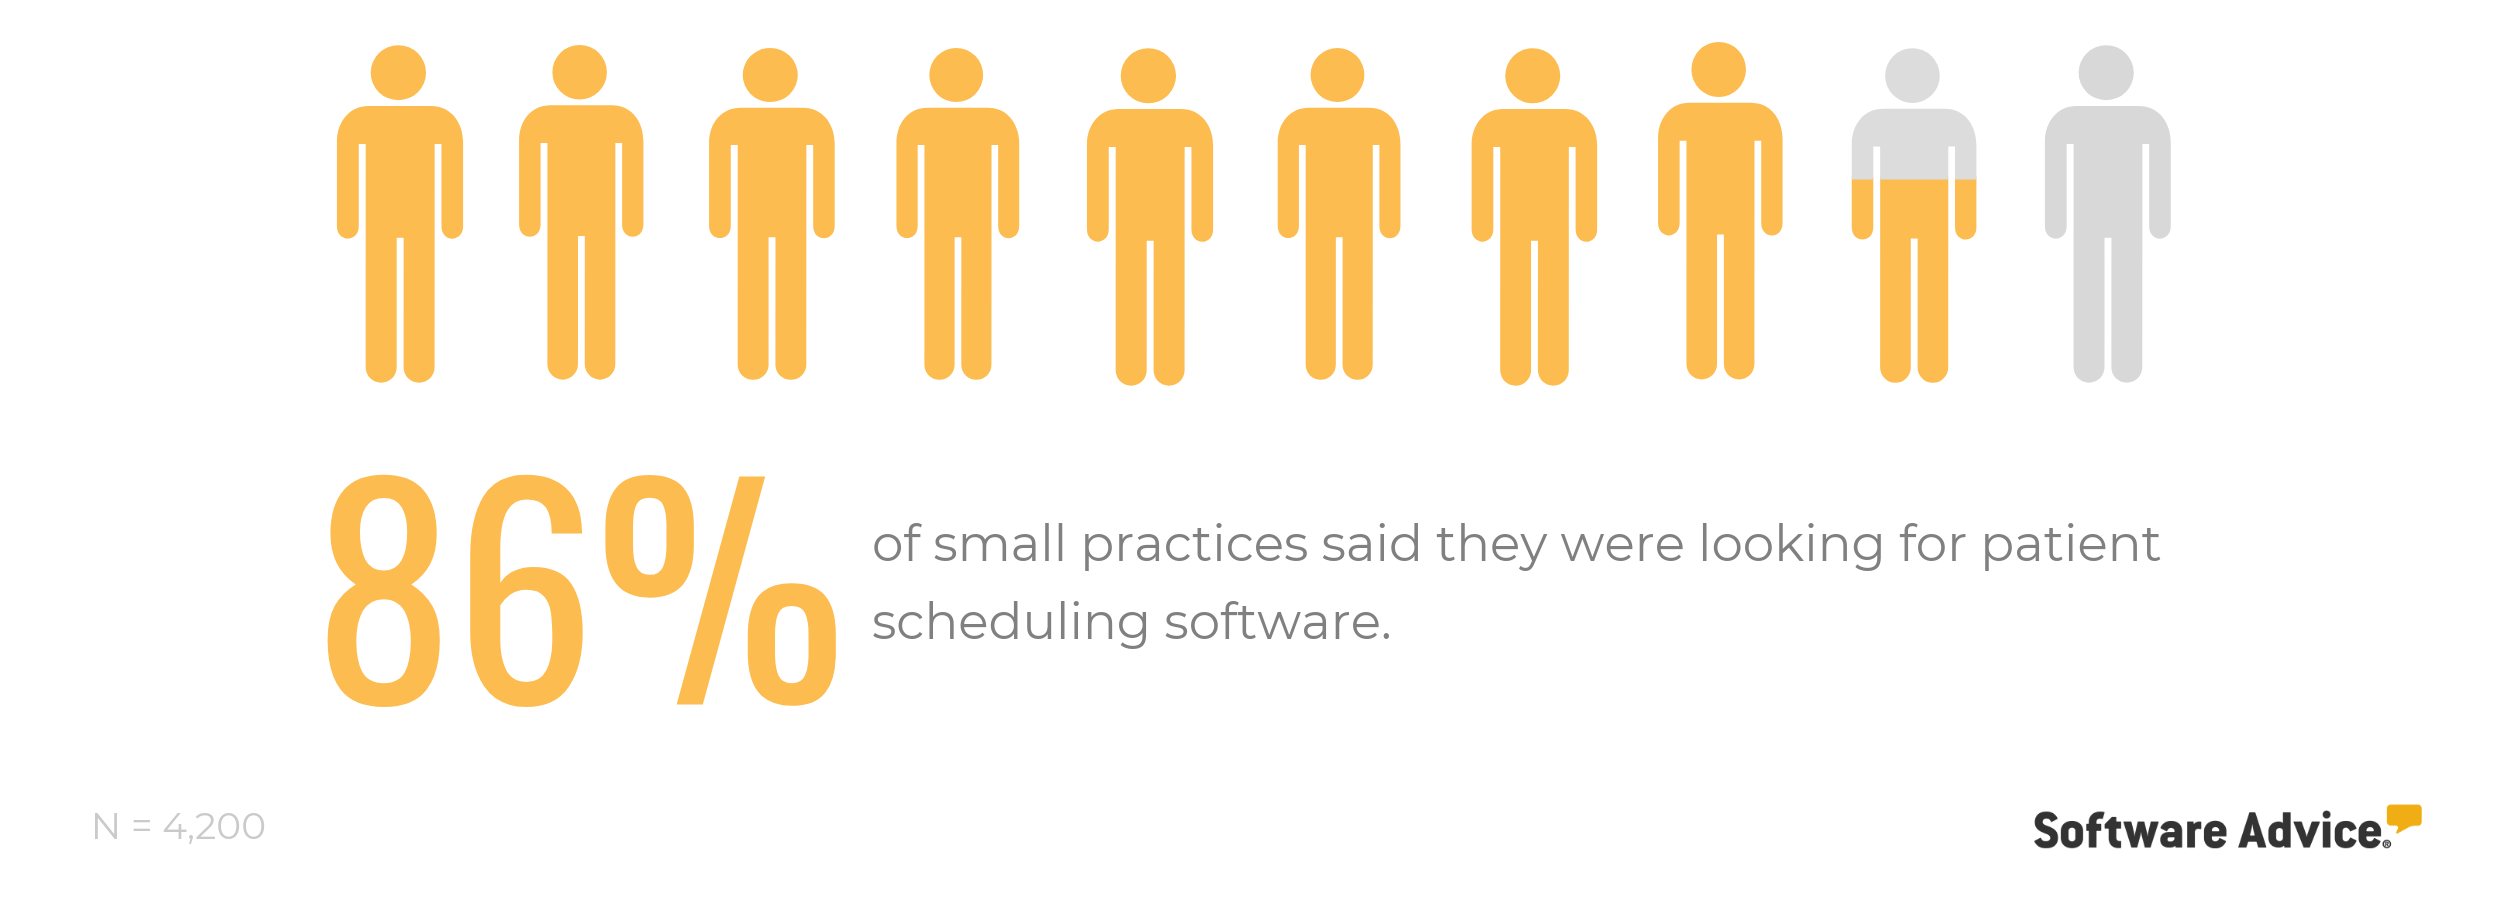 86-percent-small-practices-are-looking-for-patient-scheduling-software